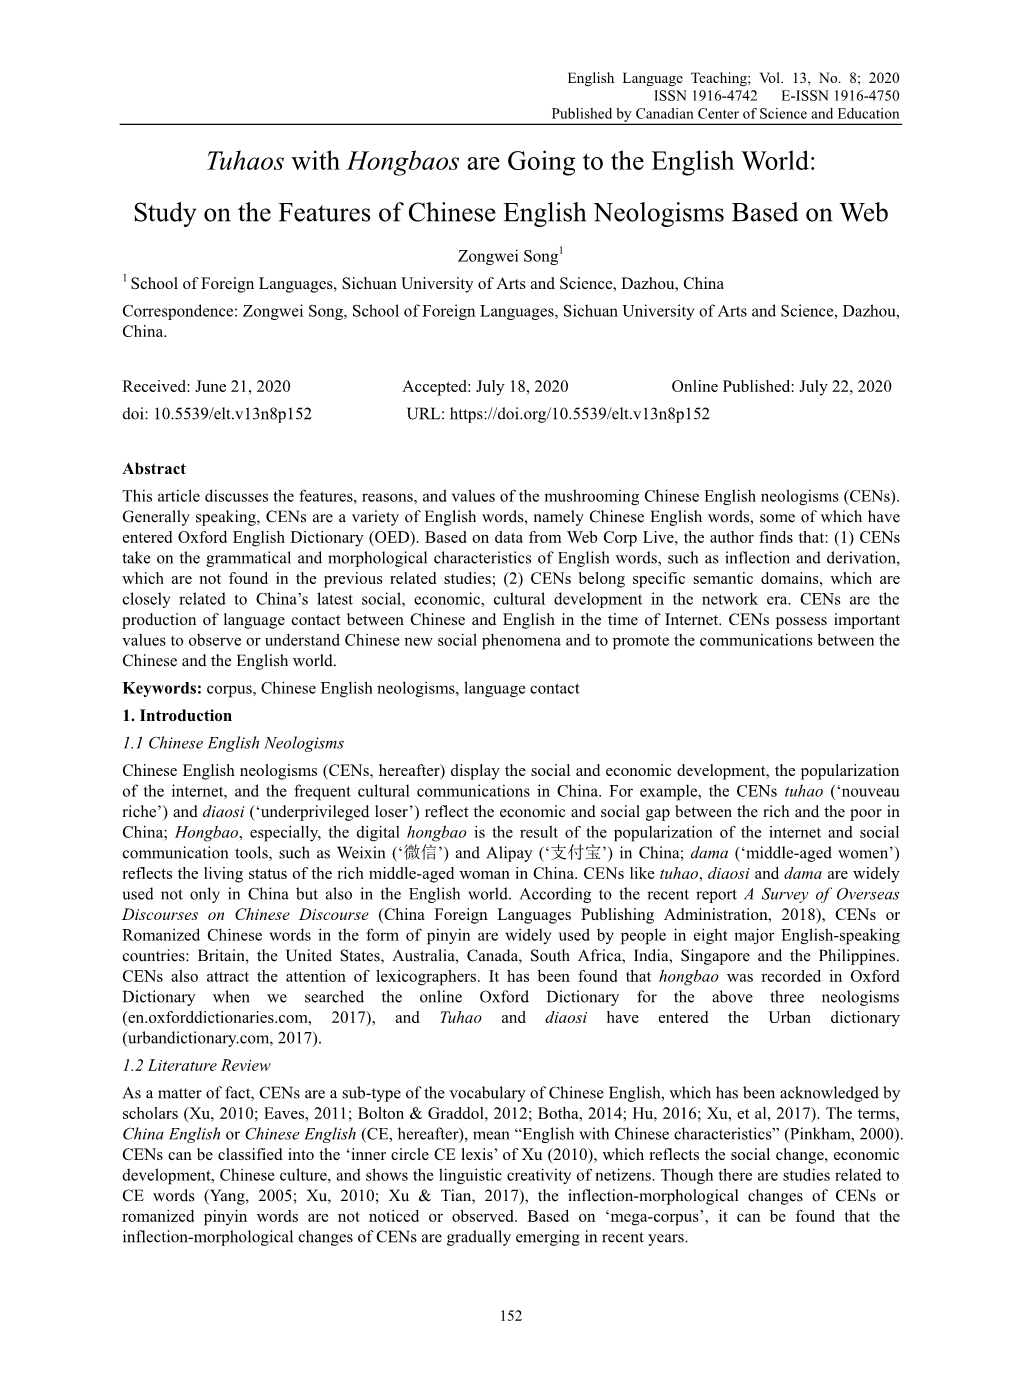 Study on the Features of Chinese English Neologisms Based on Web